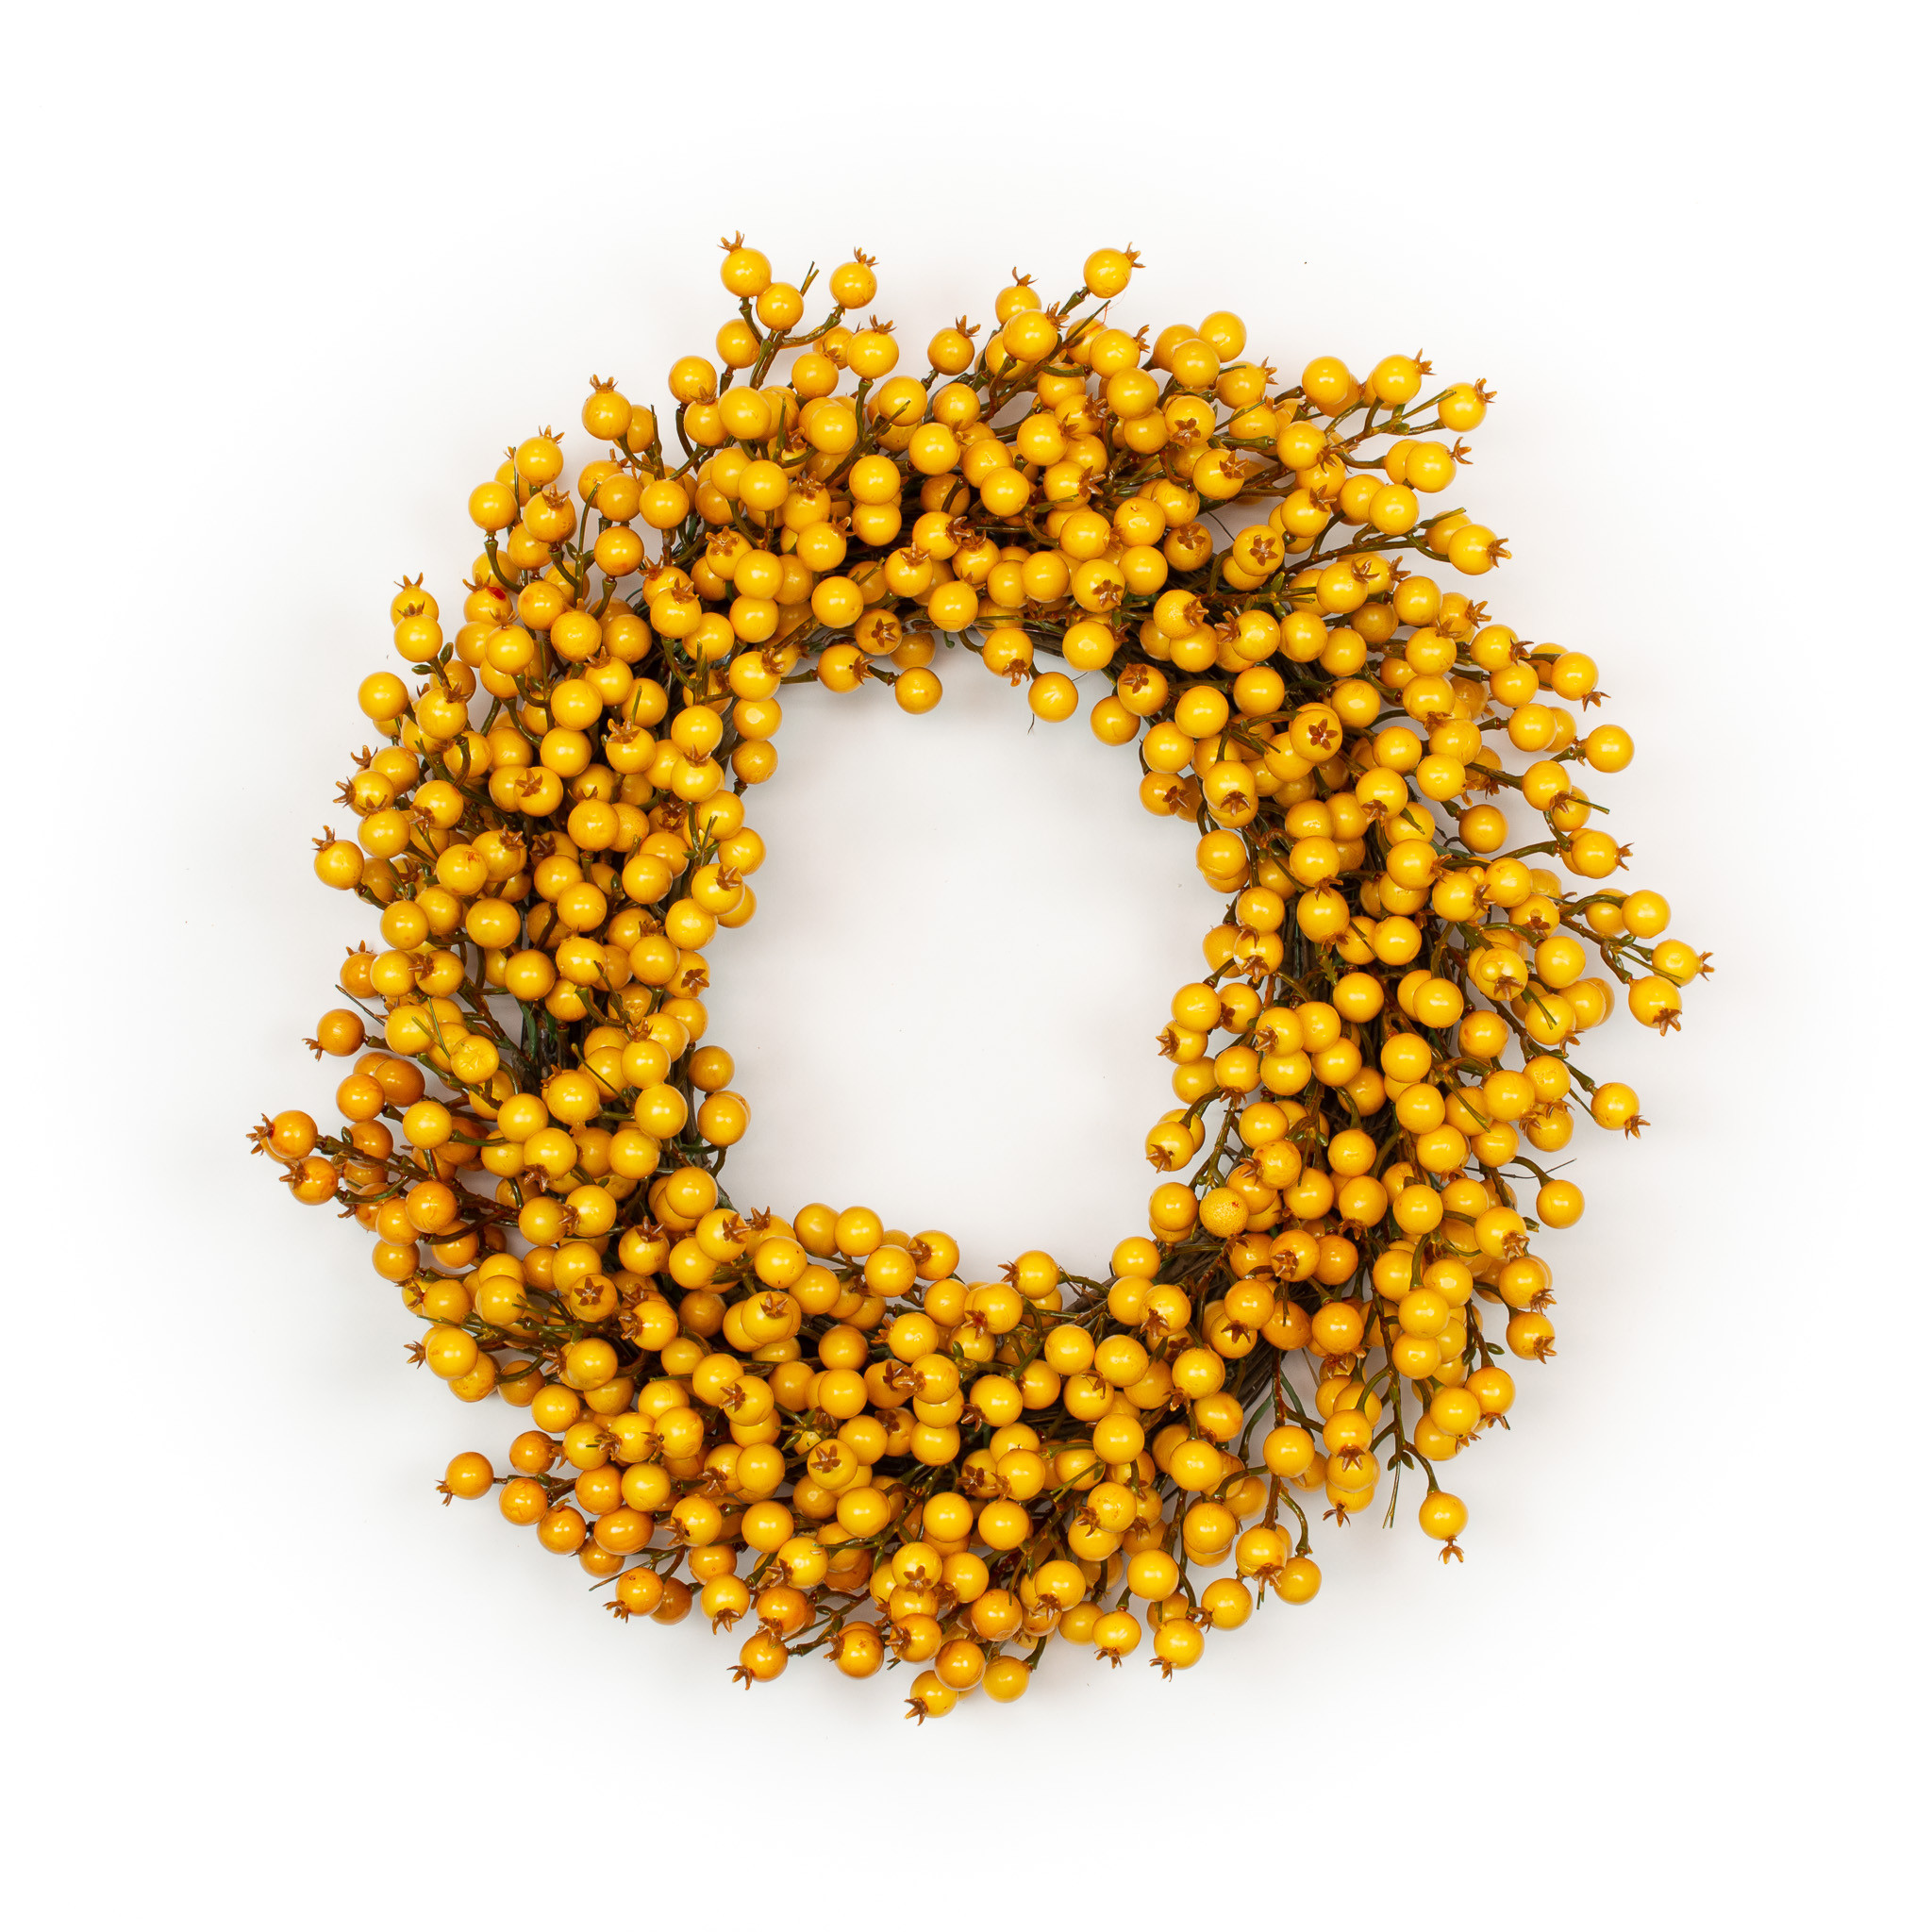 YELLOW BERRY WREATH - 24 INCH - Mills Floral Company